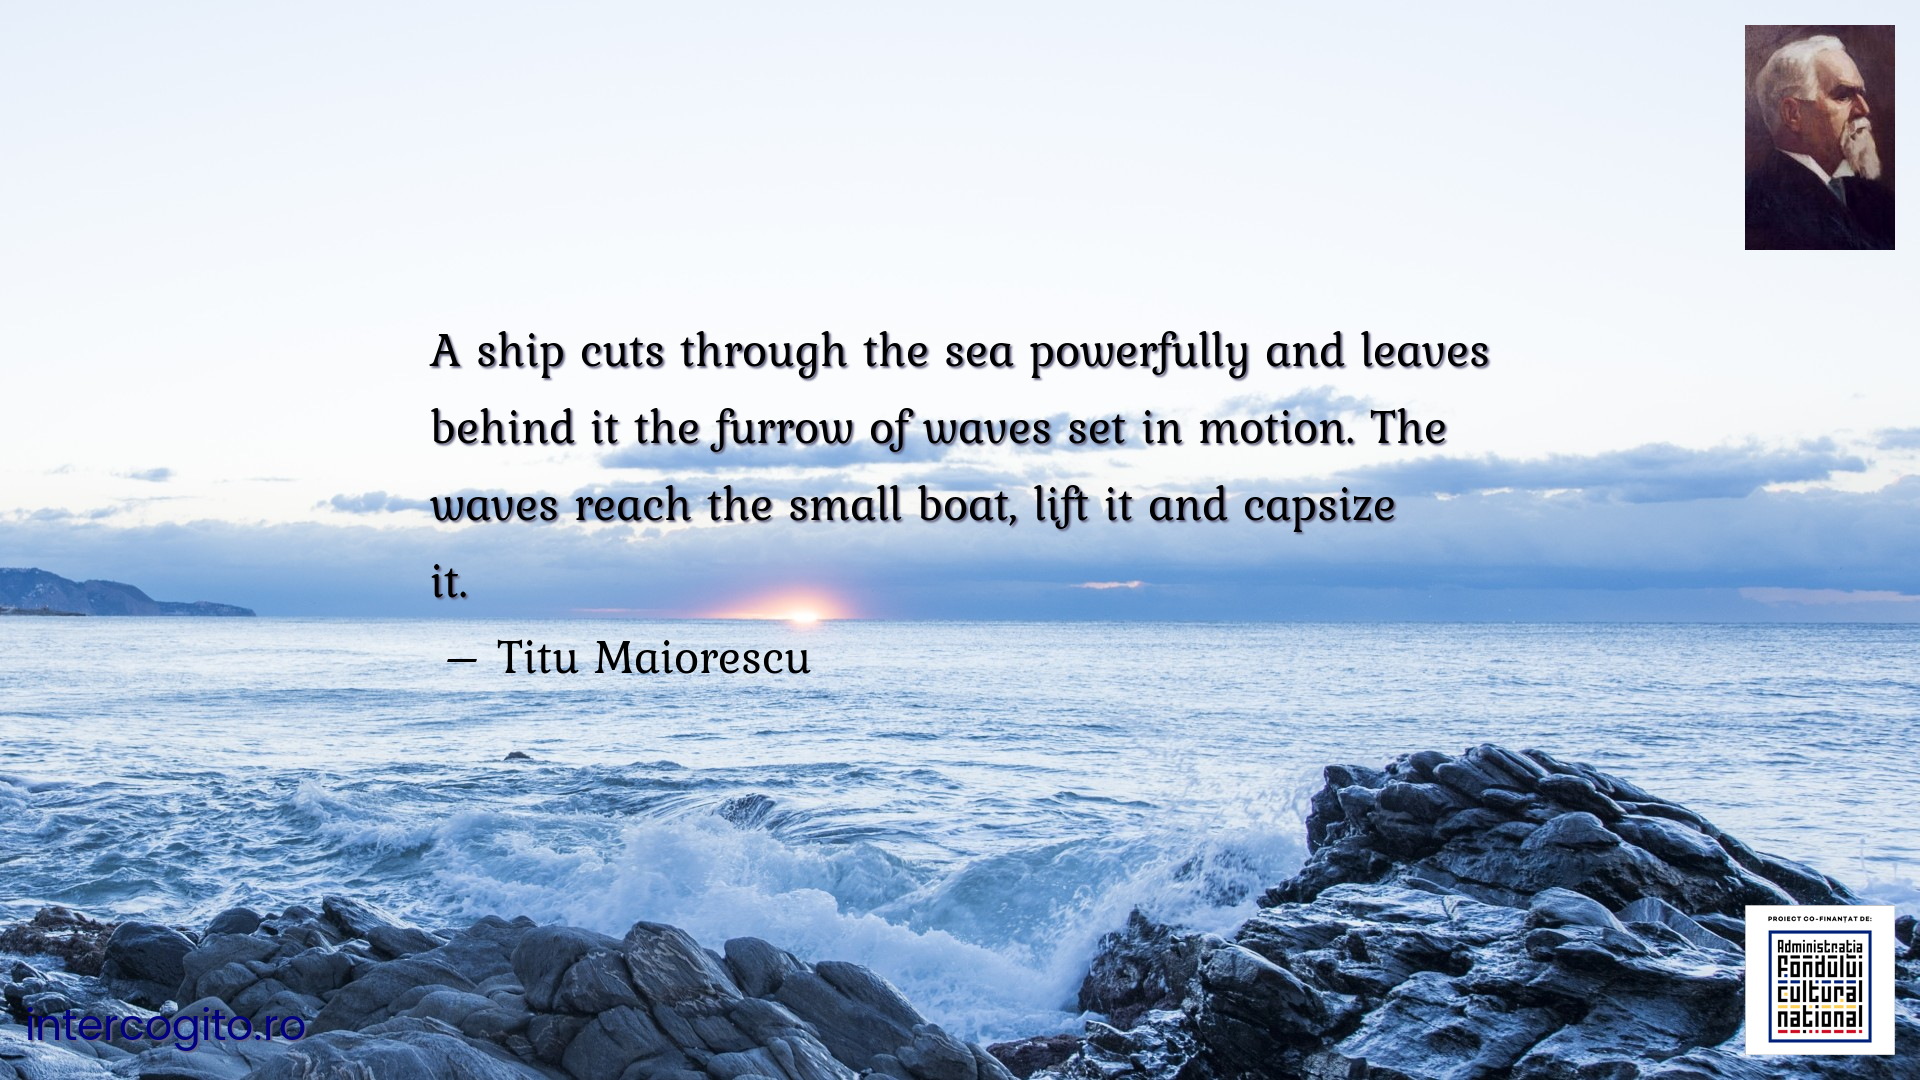 A ship cuts through the sea powerfully and leaves behind it the furrow of waves set in motion. The waves reach the small boat, lift it and capsize it.